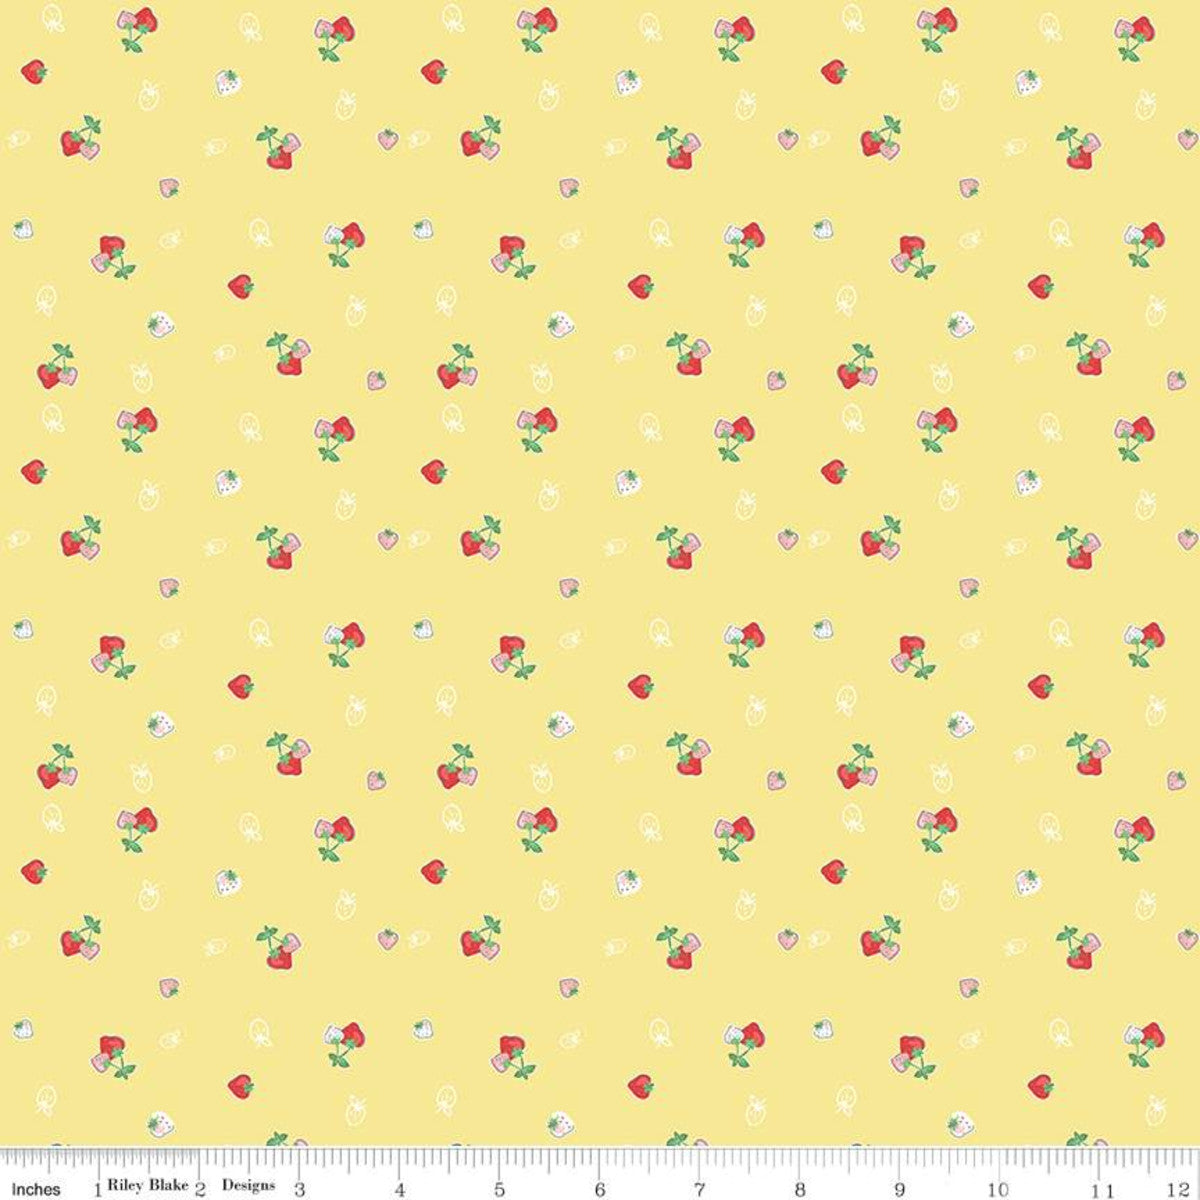 Quilt Fair strawberries on yellow